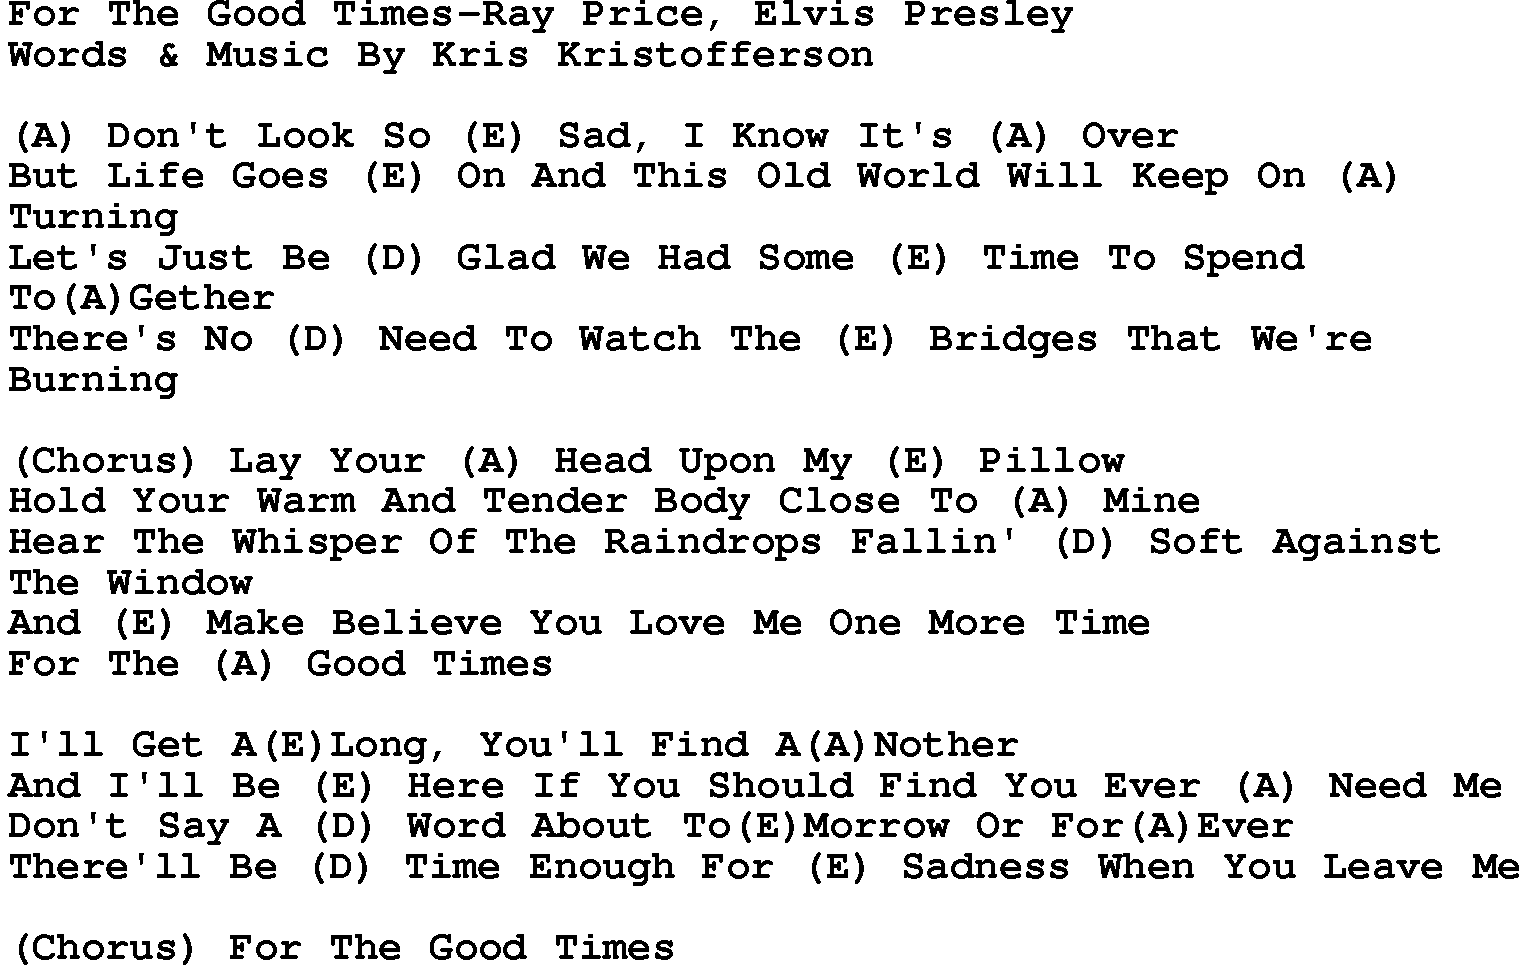 Country music song: For The Good Times-Ray Price, Elvis Presley lyrics and chords